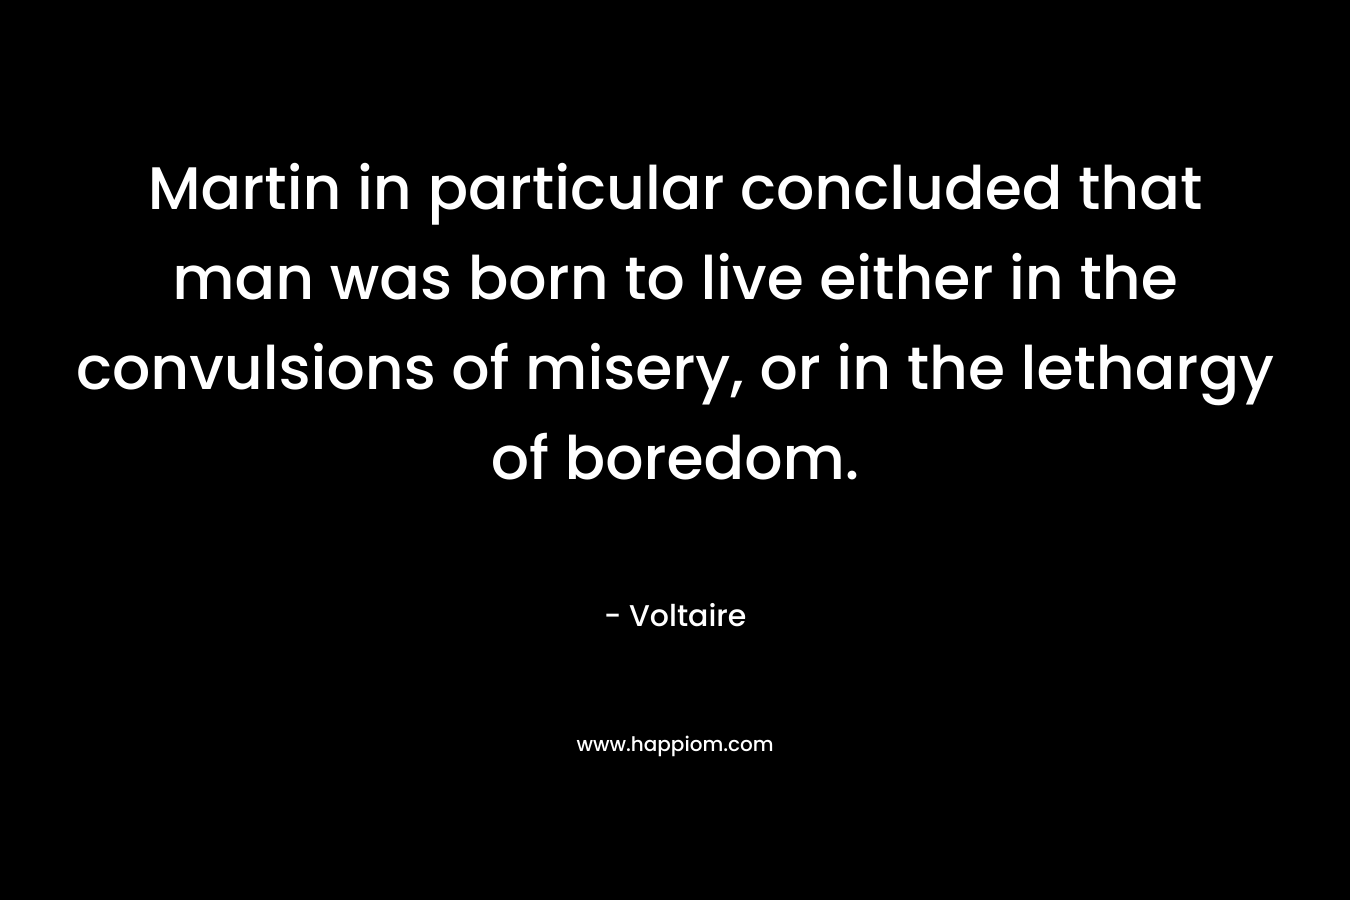 Martin in particular concluded that man was born to live either in the convulsions of misery, or in the lethargy of boredom.